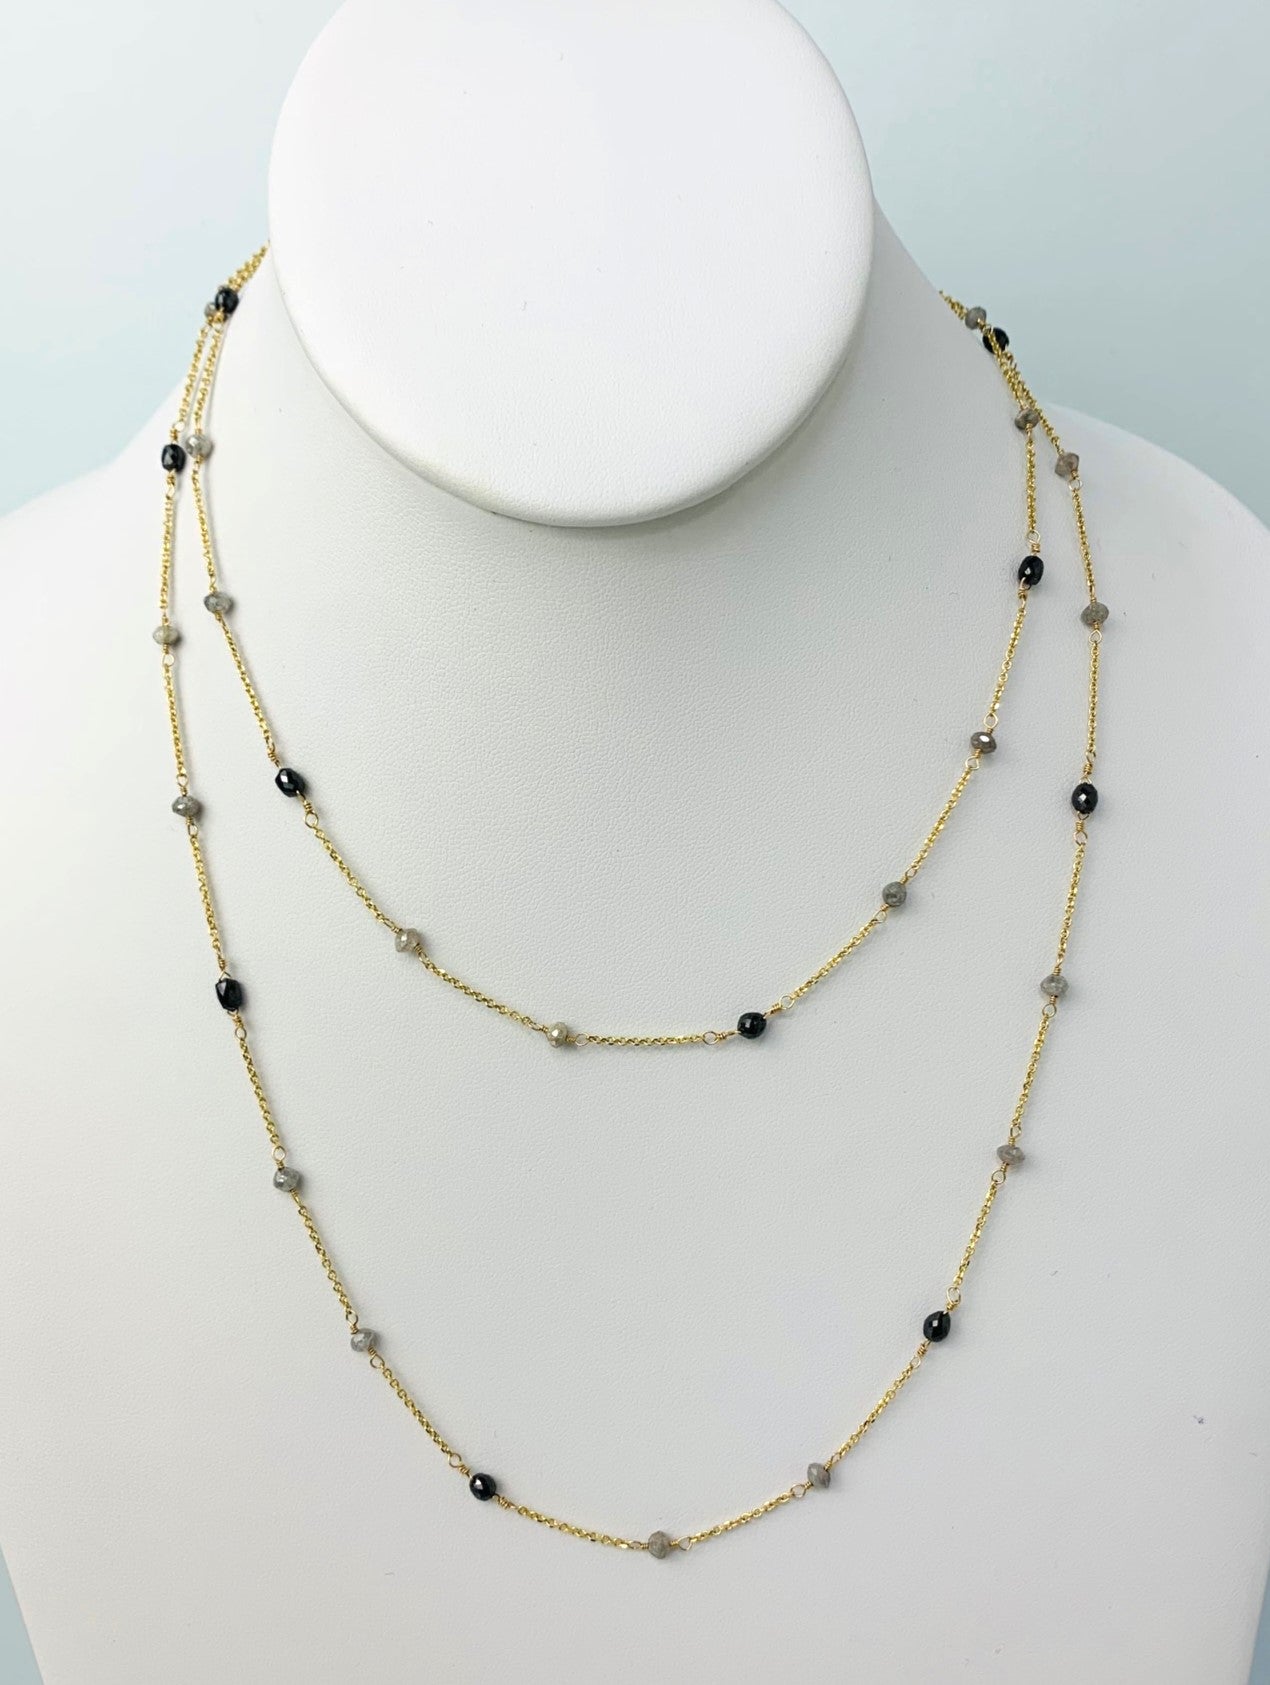 36" Black And Grey Diamond Station Necklace in 14KY - NCK-282-TNCDIA14Y-GRYBK-36 7.70ctw